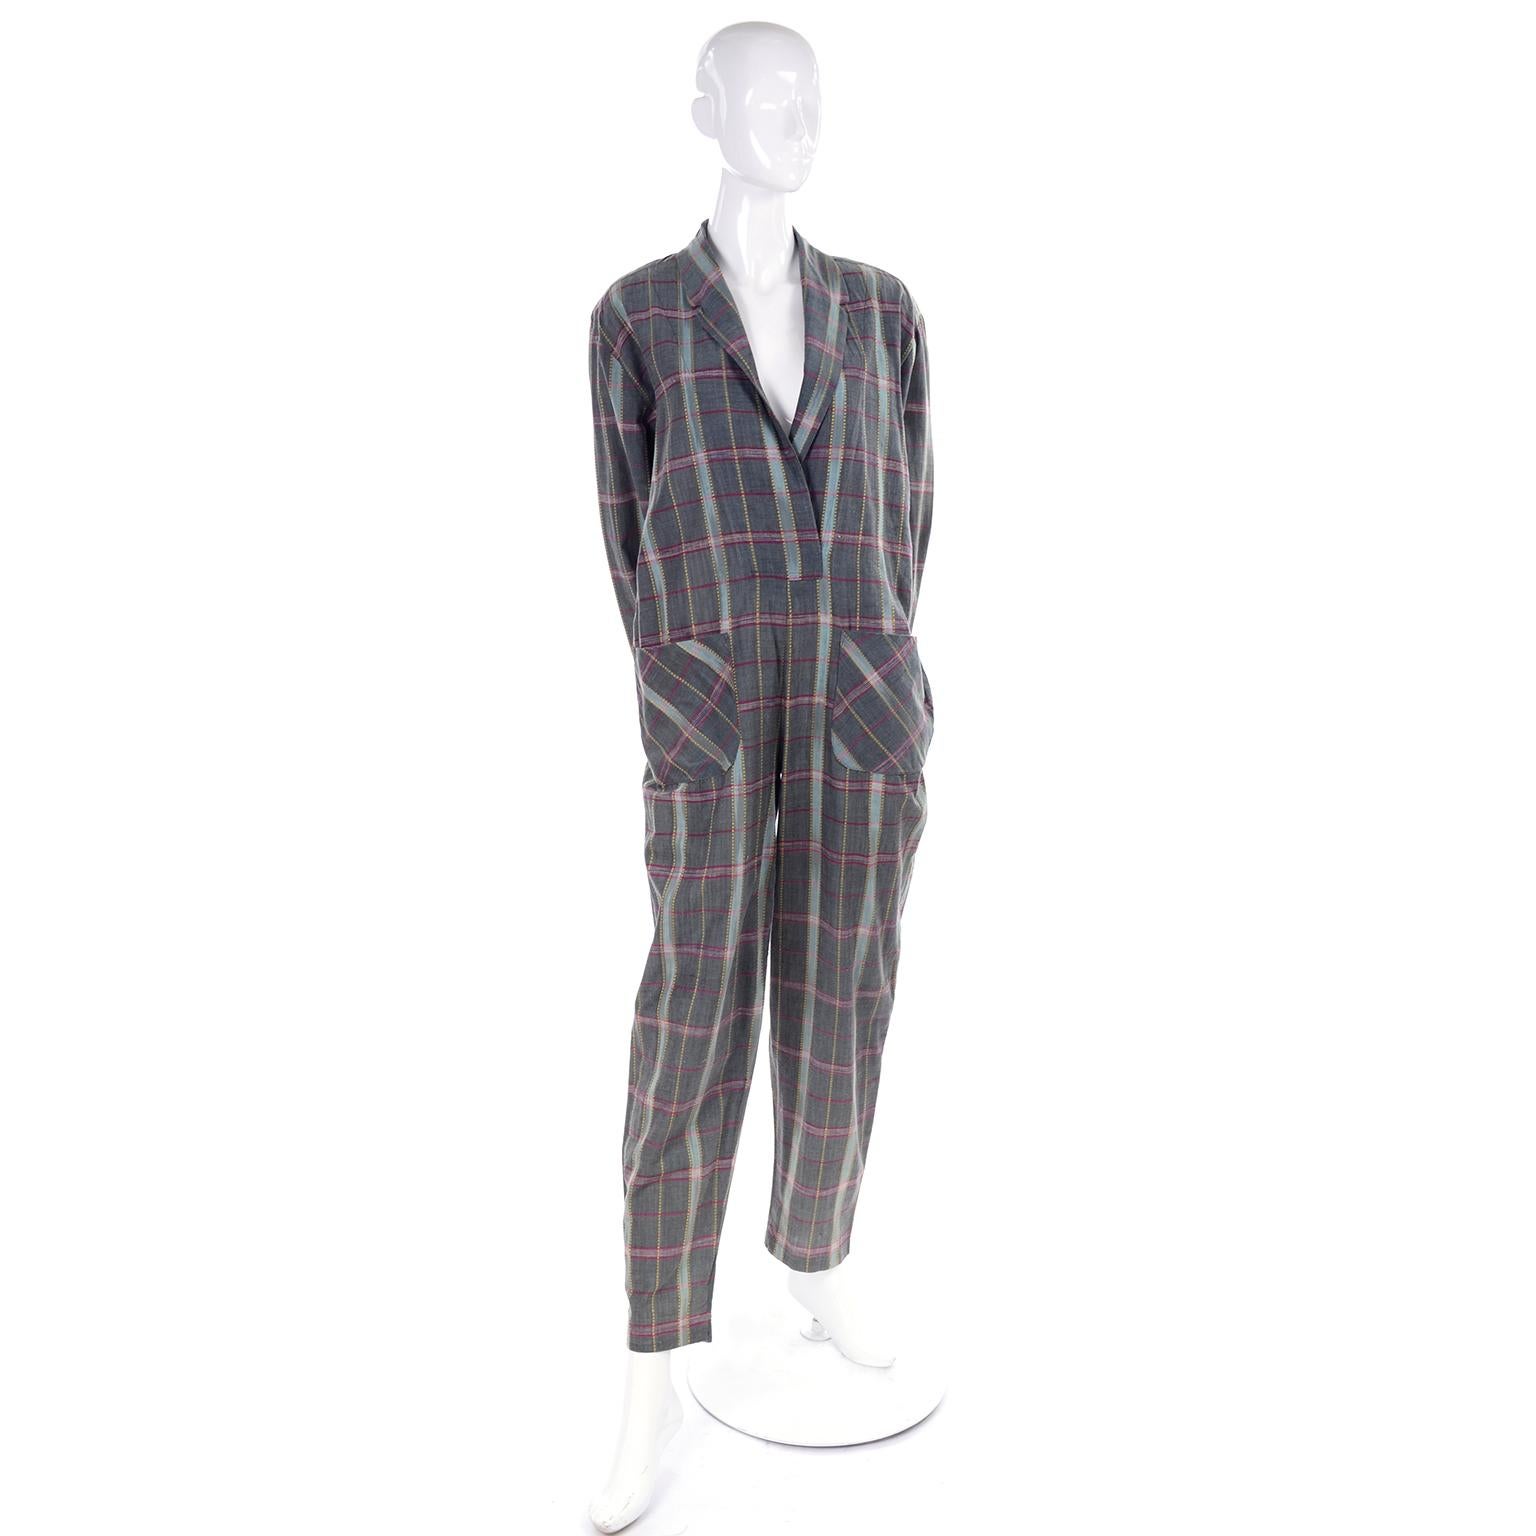 This is a perfect, loose fitting vintage jumpsuit to wear this Spring and Summer and into the Fall! The gray, yellow and burgundy plaid jumpsuit has an open front with lapels and no closures. This is such a versatile piece and it is so easy to wear!